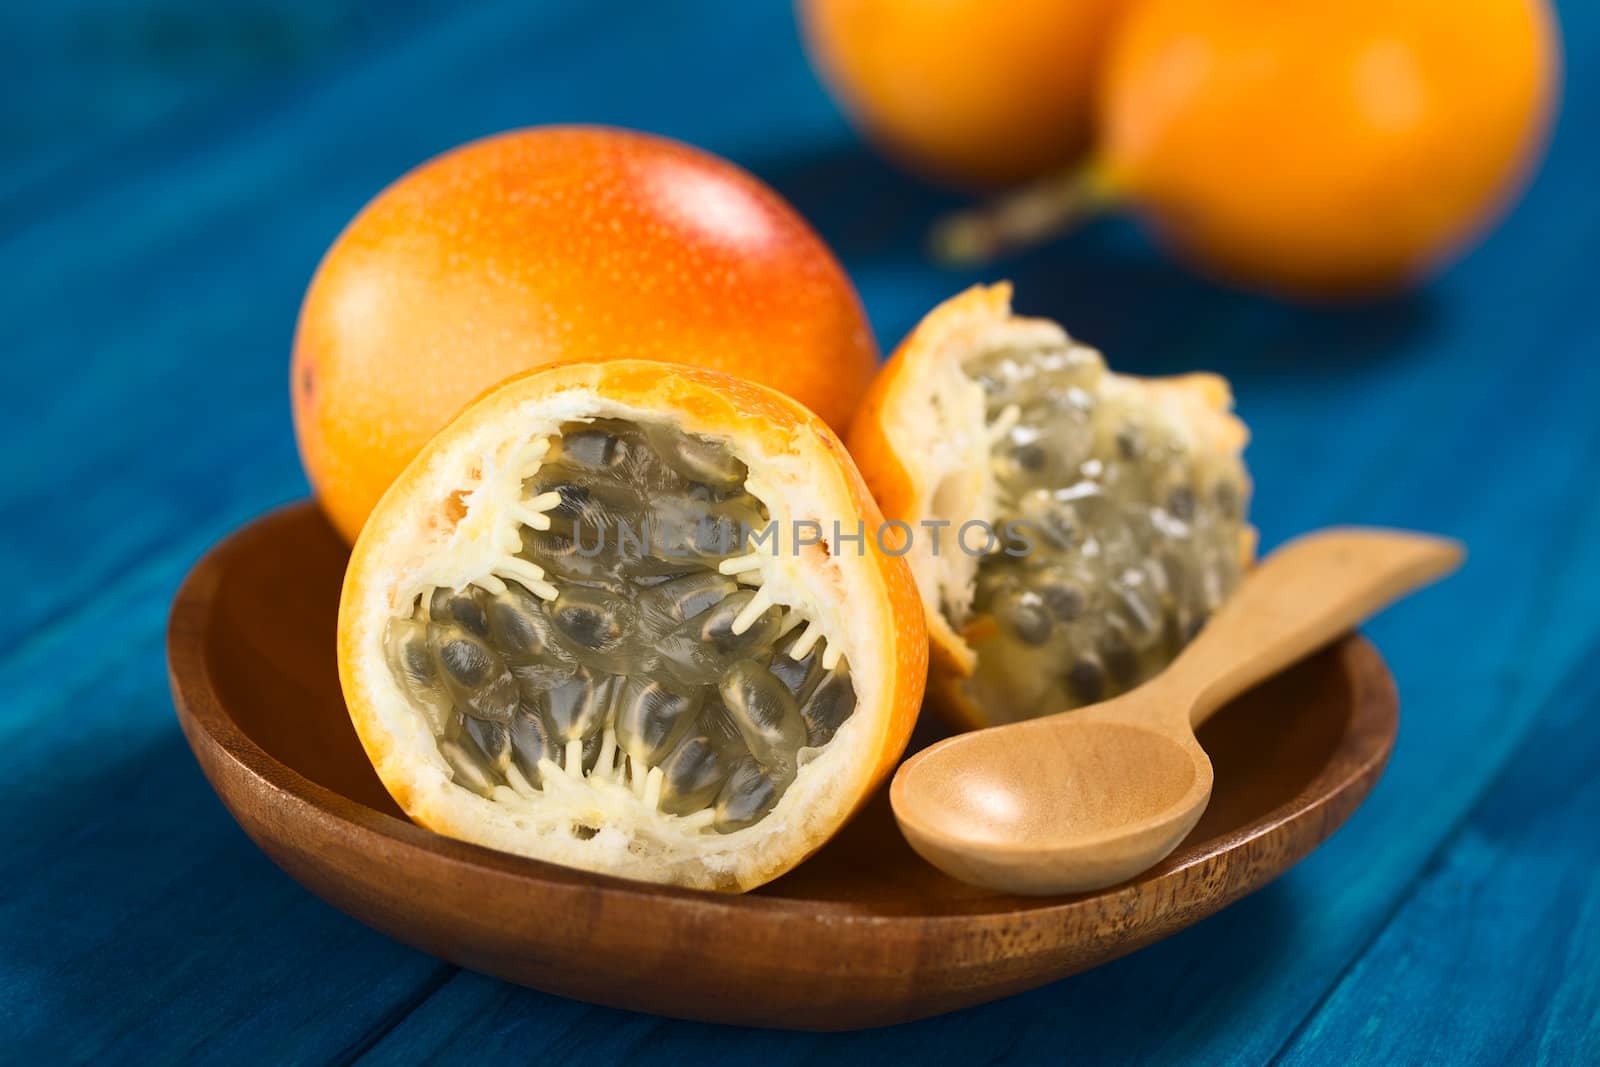 Sweet granadilla or grenadia (lat. Passiflora ligularis) fruit cut in half,  of which the seeds and the surrounding juicy pulp is eaten or is used to prepare juice, served on wooden plate with wooden spoon (Selective Focus, Focus on the front of the seeds)